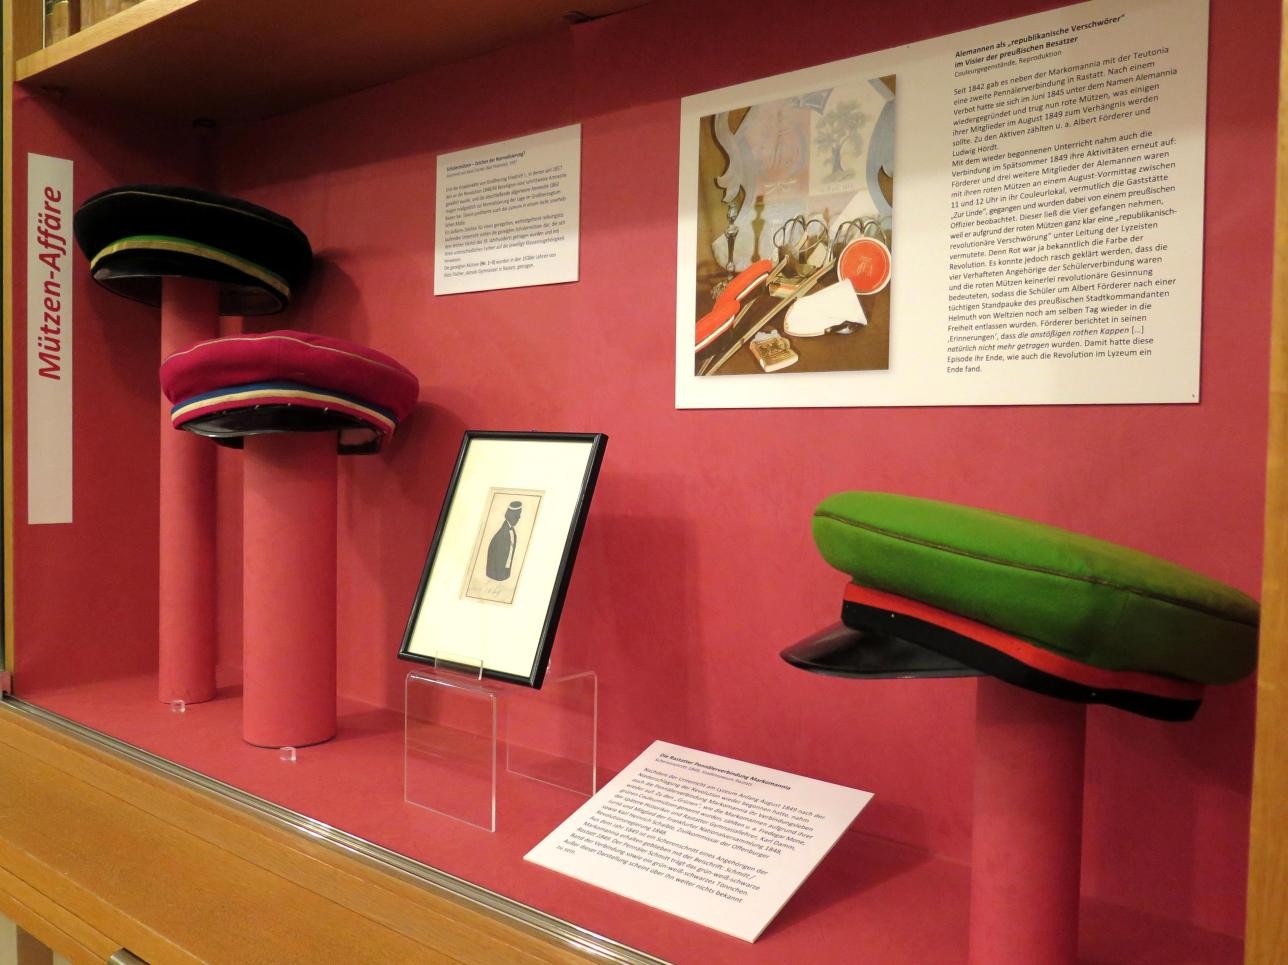  Special exhibition "With top hat and shooting stick... The Rastatt Lyceum and the Baden Revolution" in the Historical Library